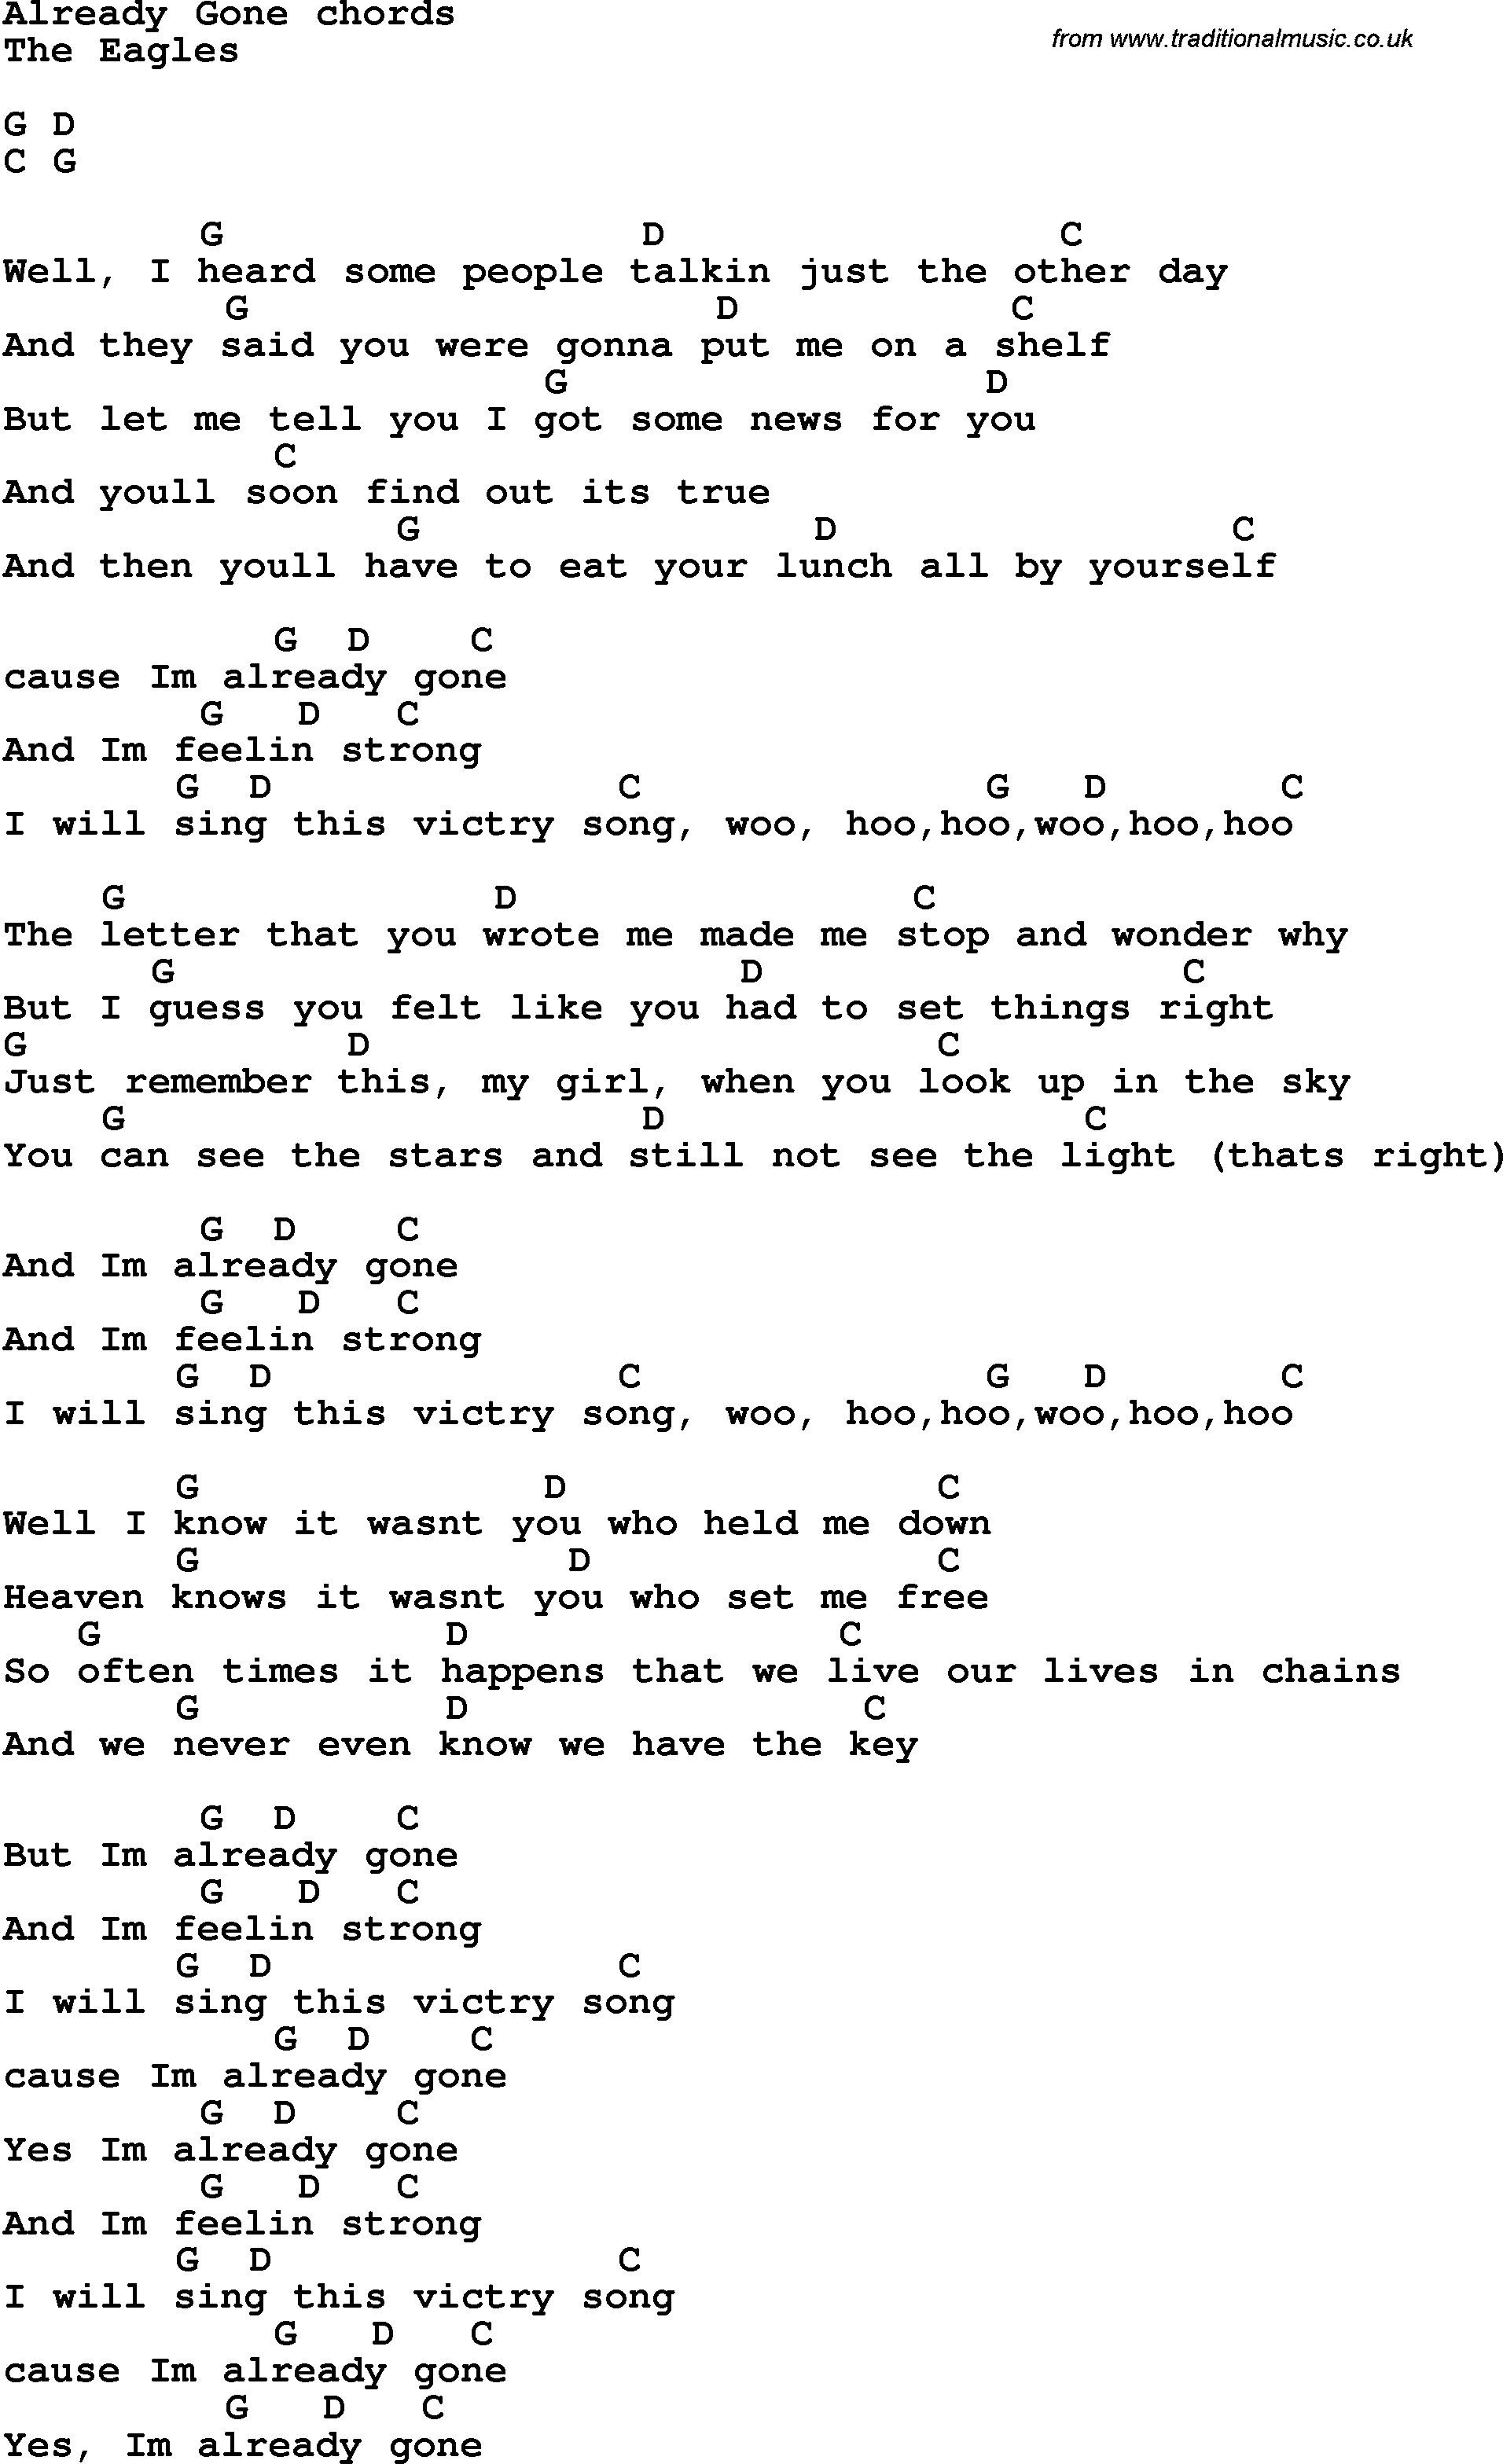 Song Lyrics with guitar chords for Already Gone